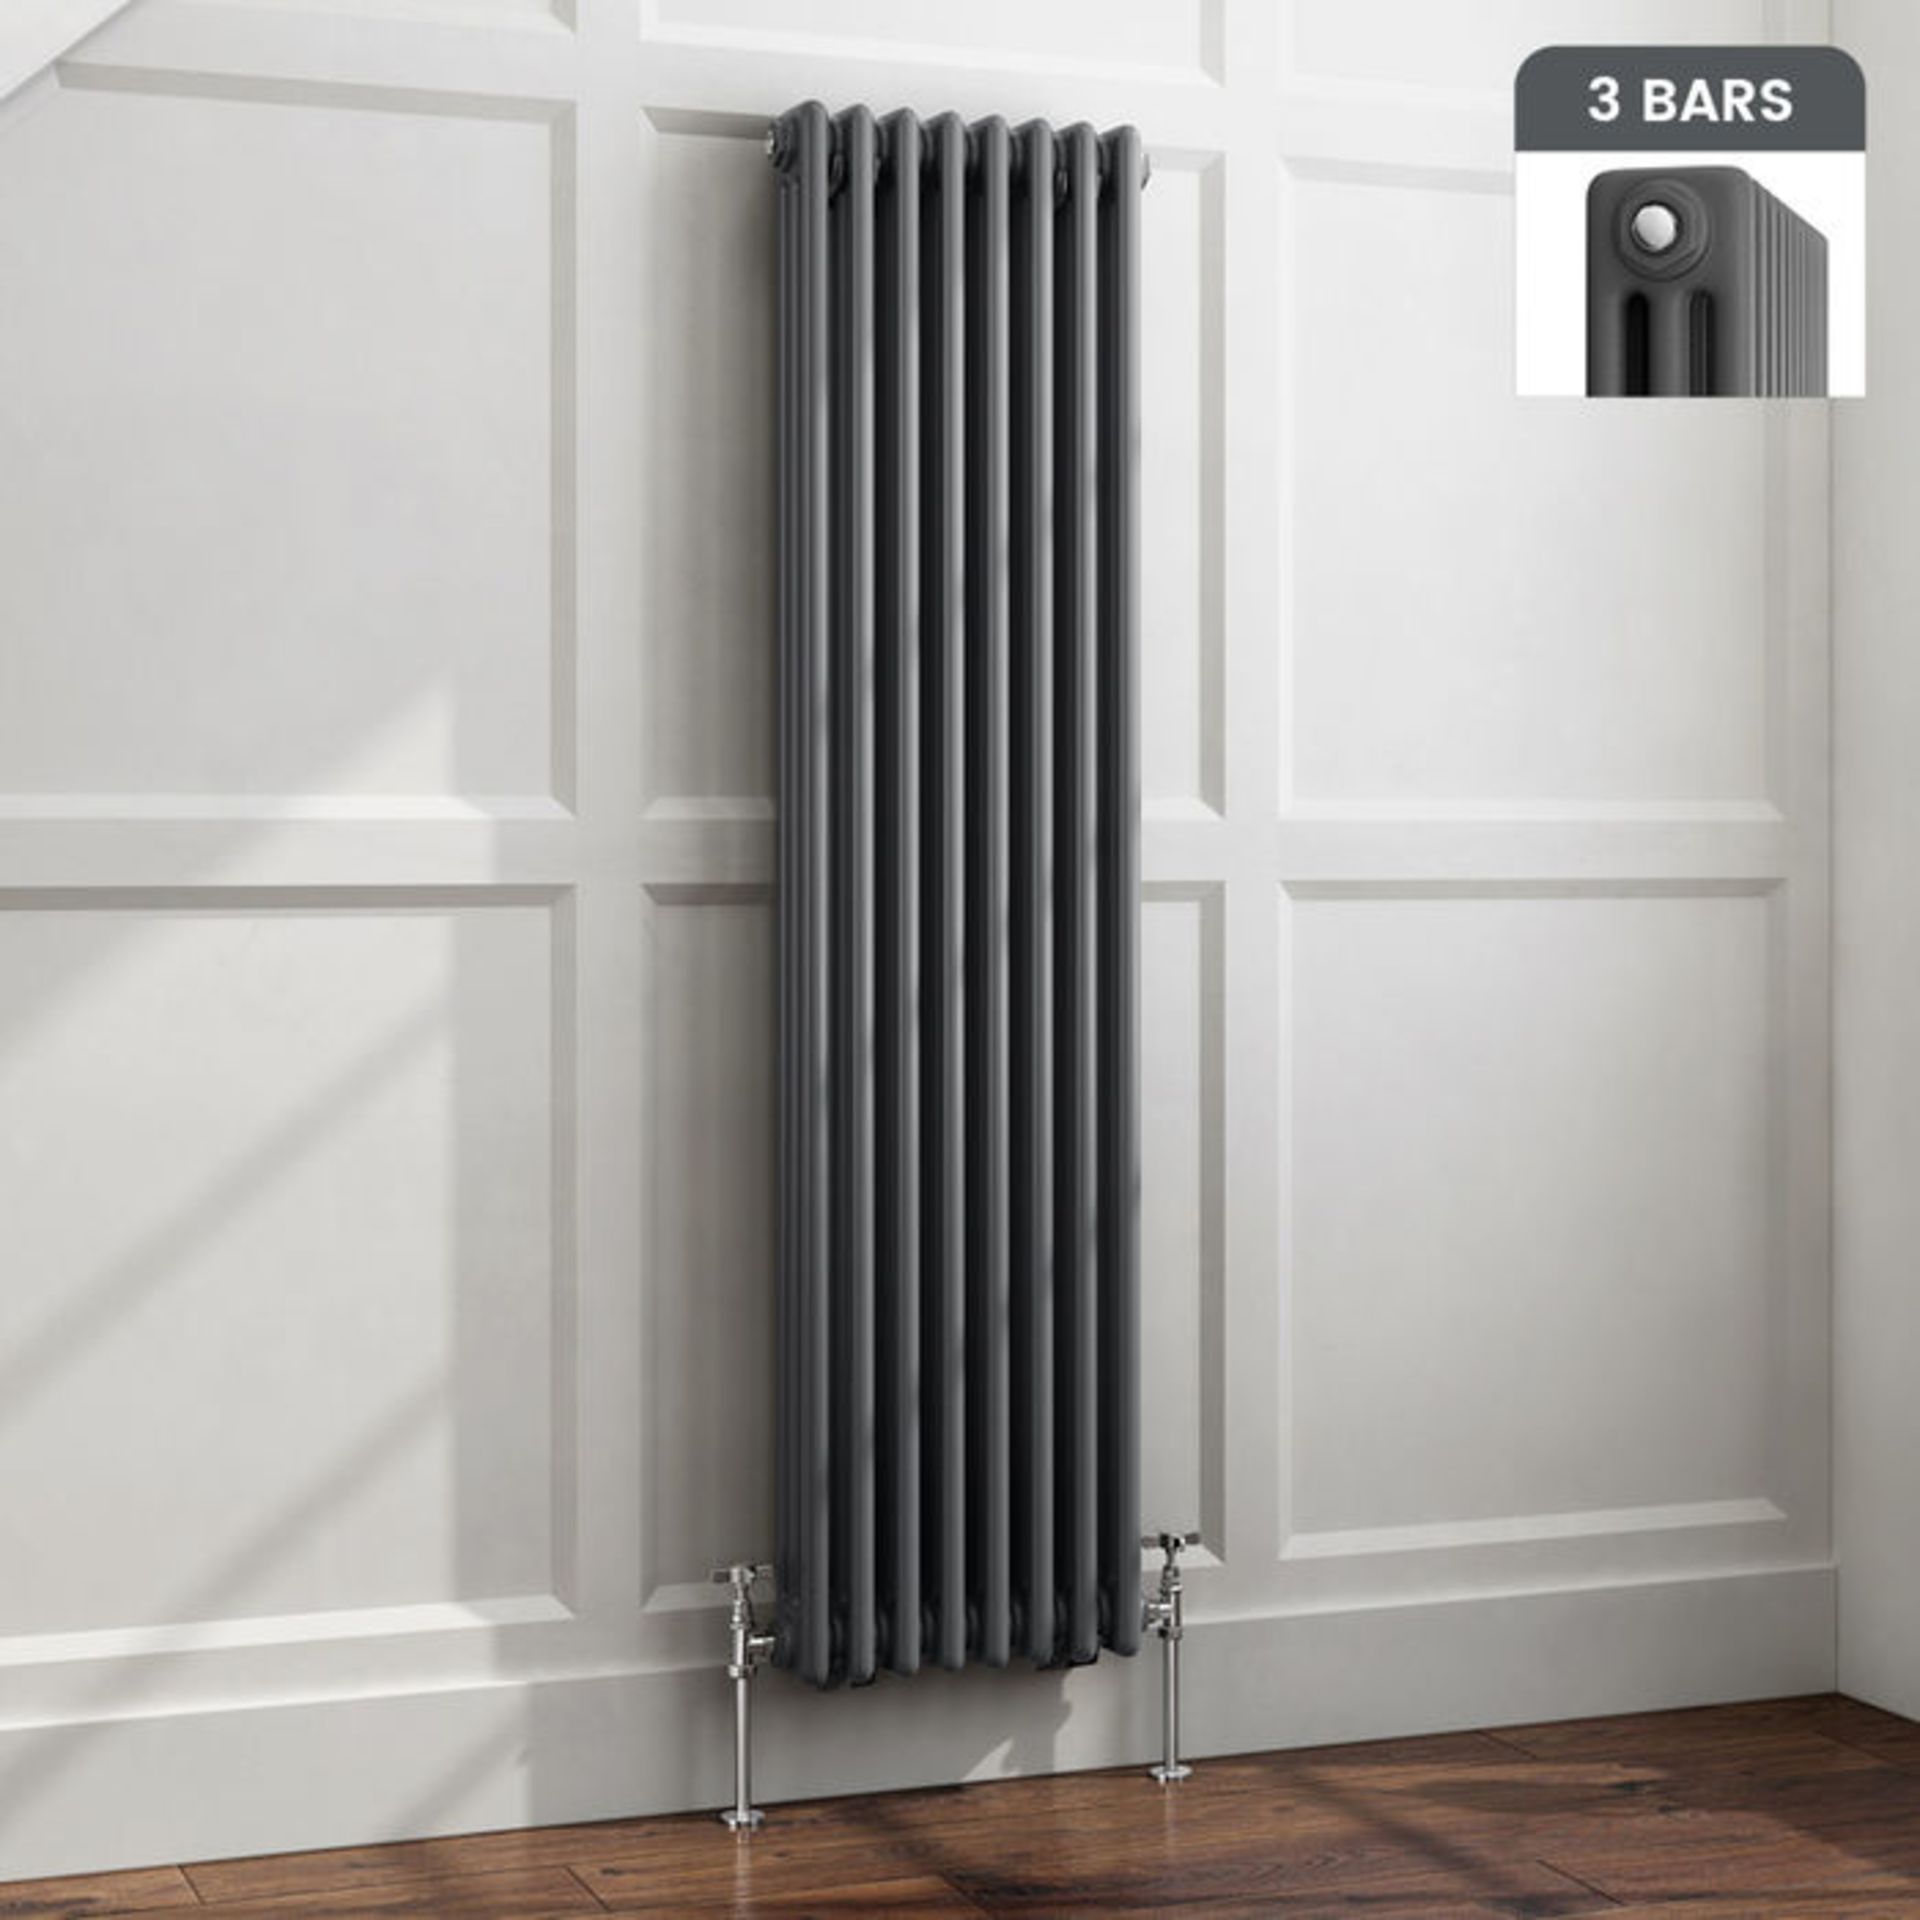 (W114) 1500x380mm Anthracite Triple Panel Vertical Colosseum Traditional Radiator. RRP £399.99. Made